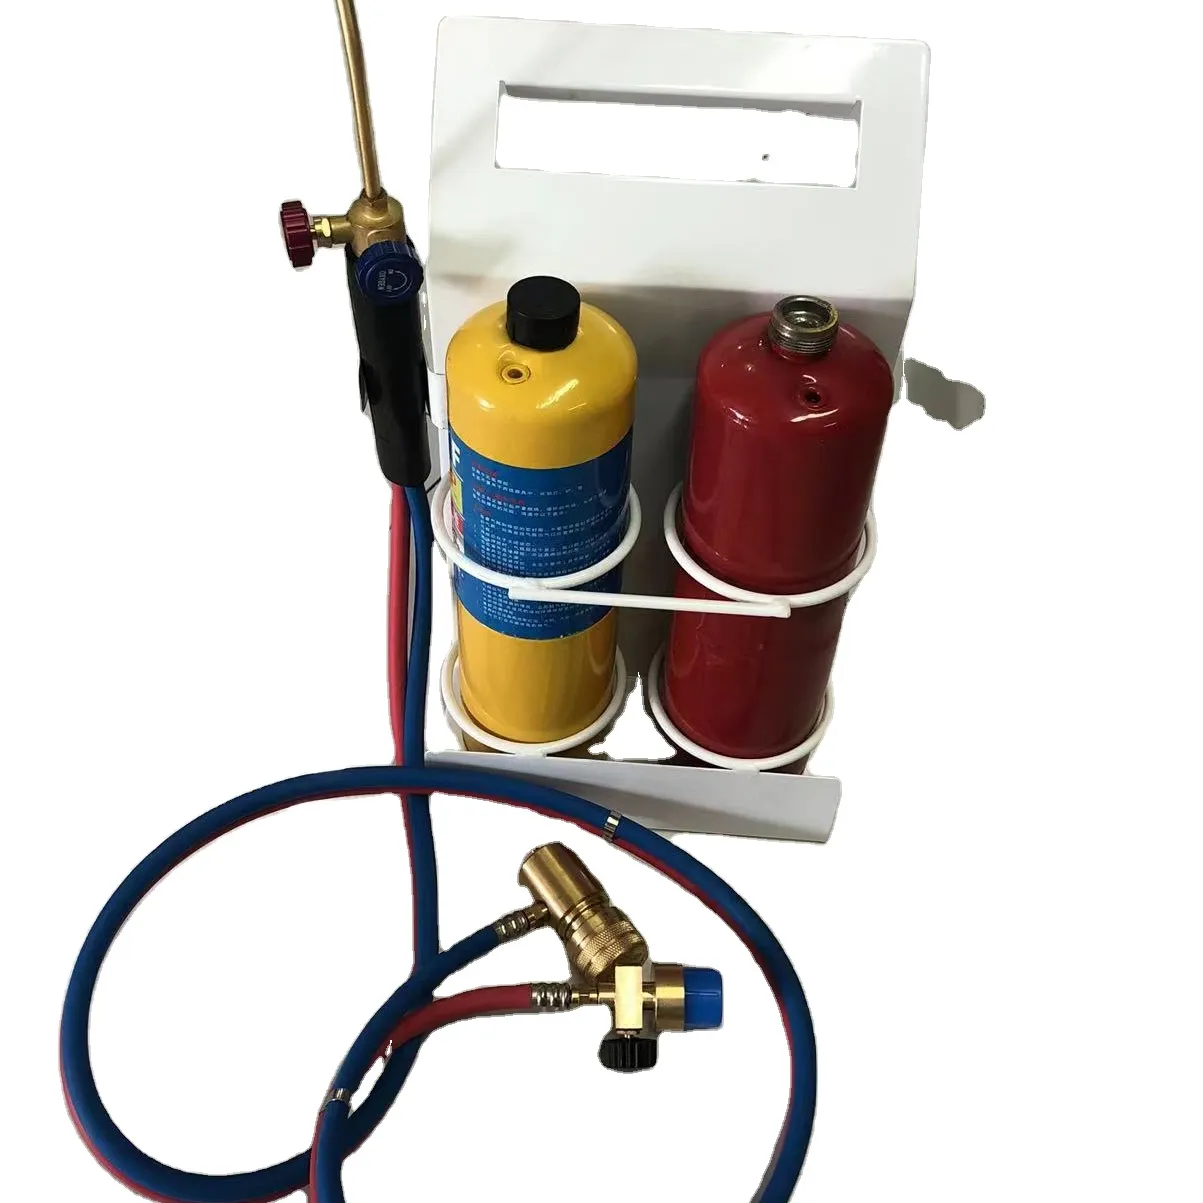 Mapp oxygen and propane  gas portable brazing and soldering welding equipment gas cutting nozzle